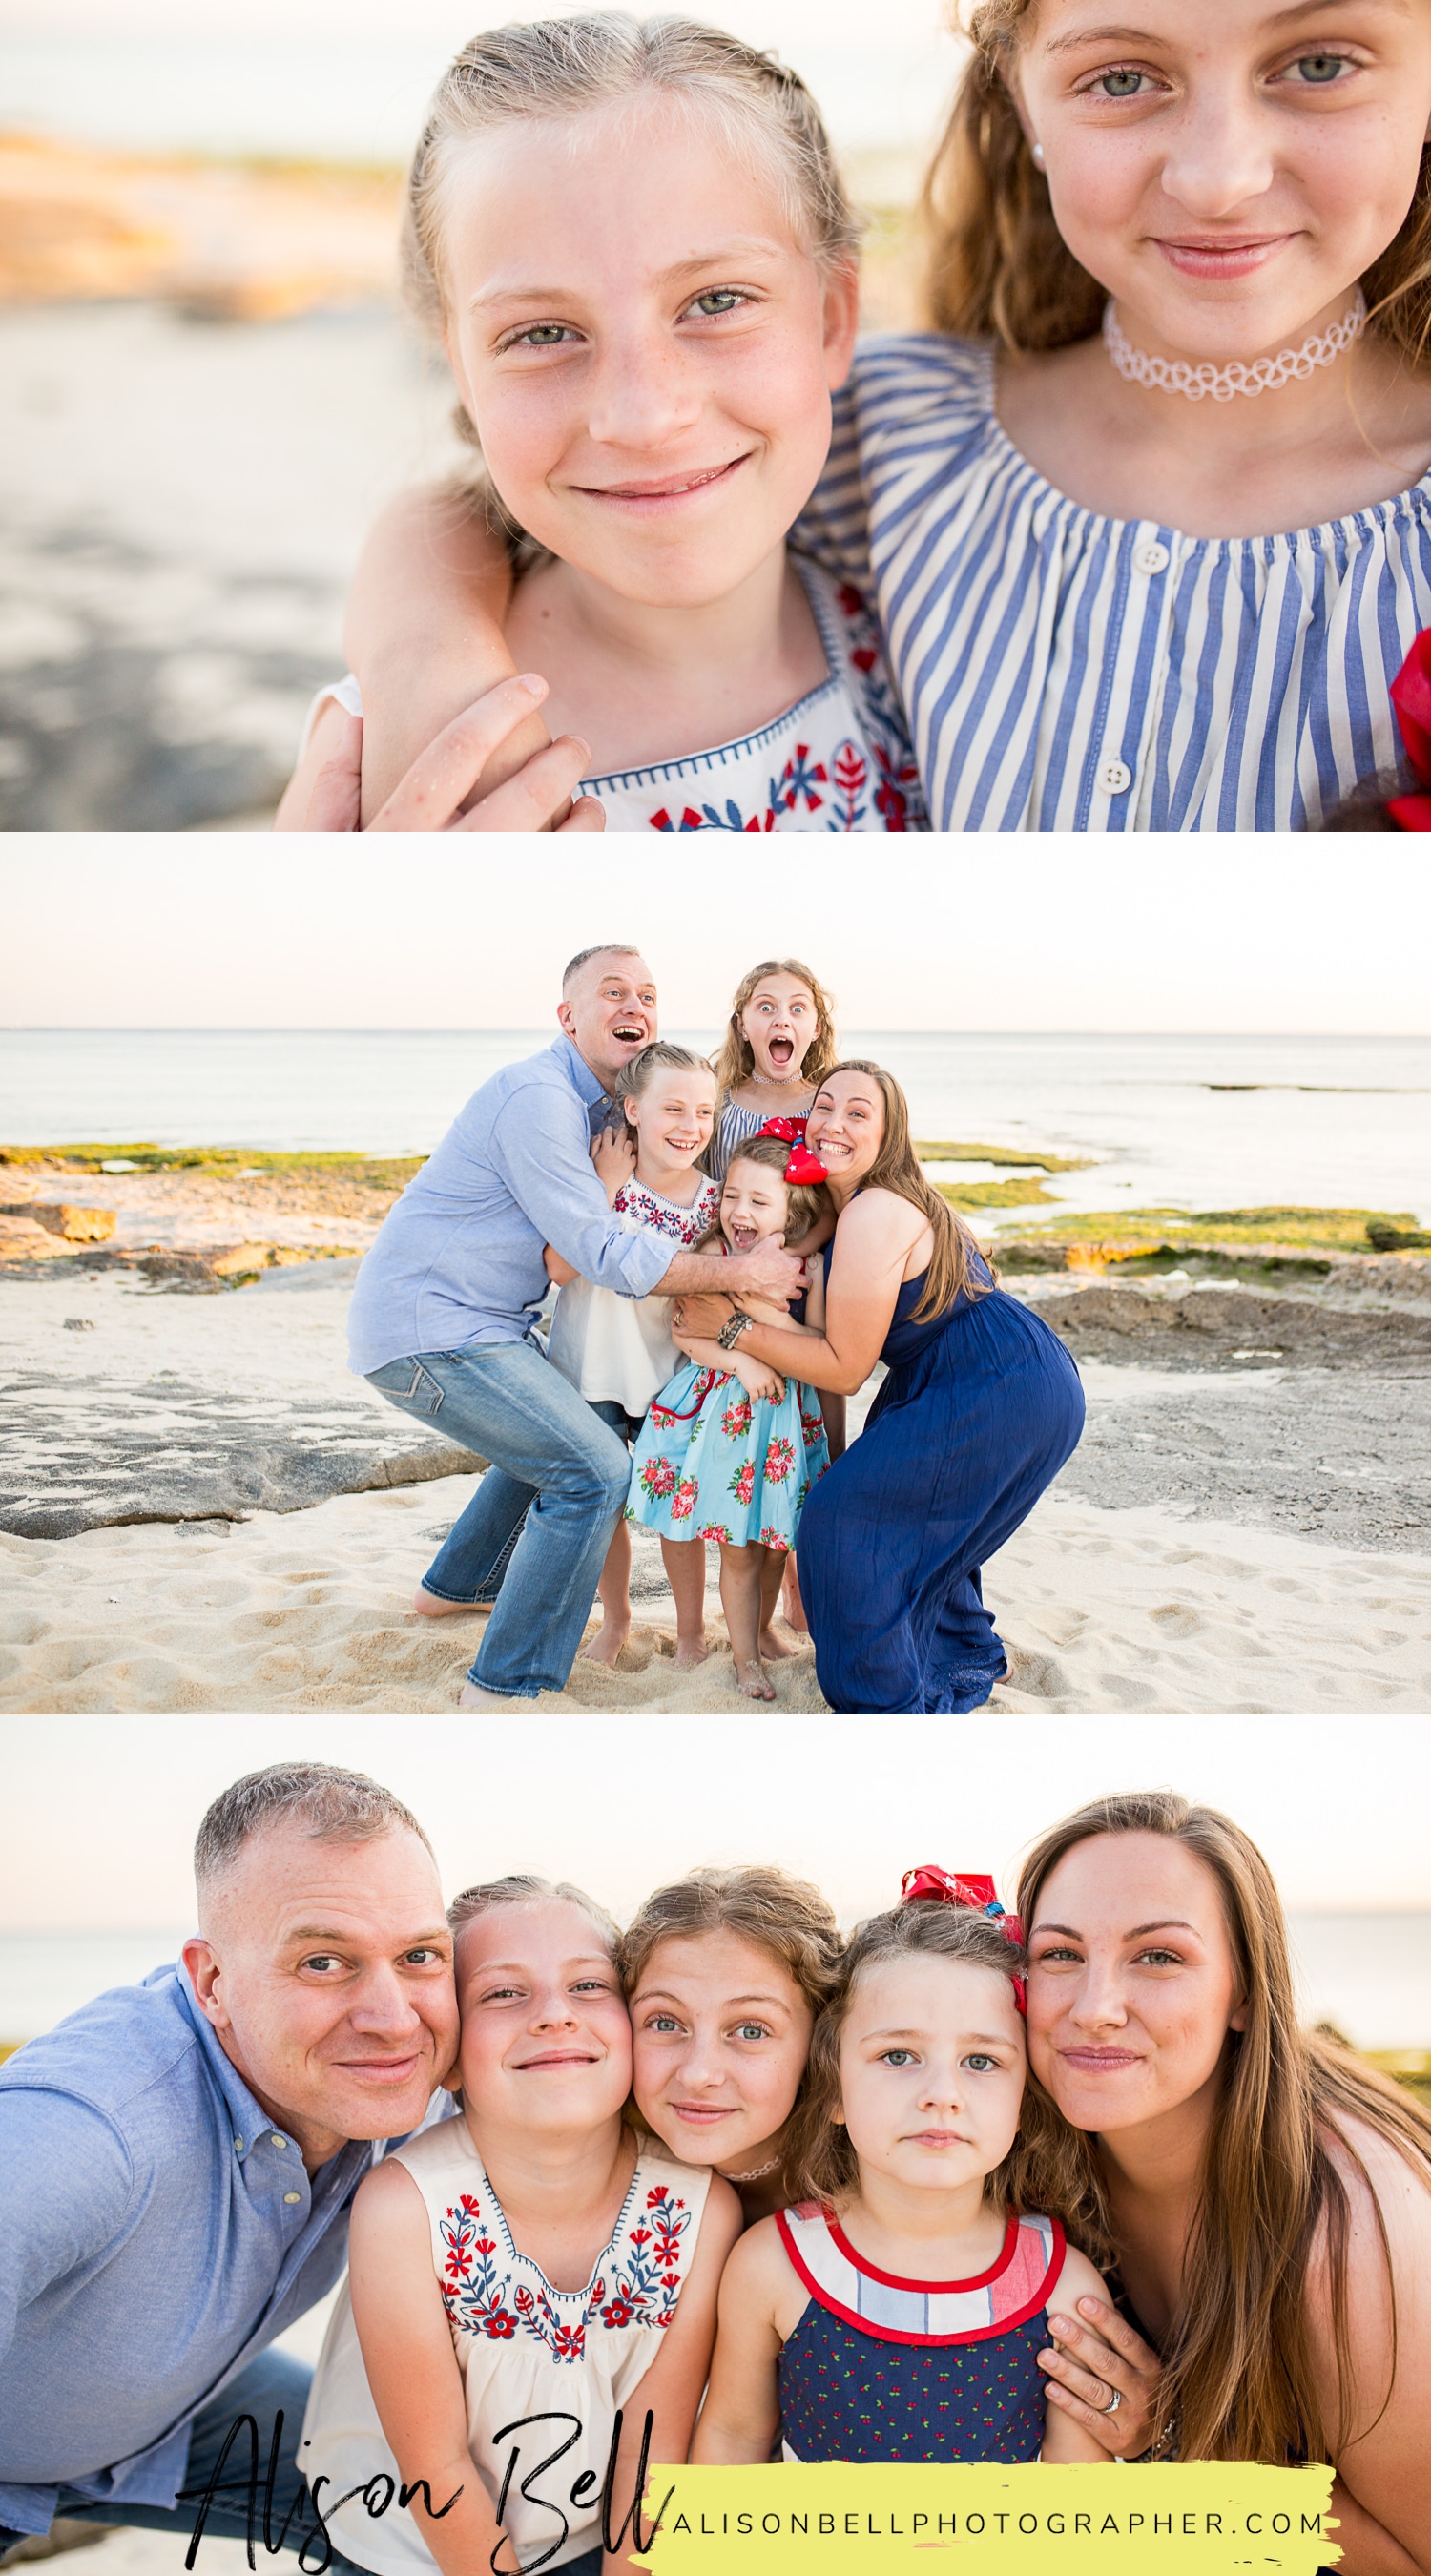 Half Priced Mini Sessions by Family Photographer Alison Bell, Photographer. Alisonbellphotographer.com